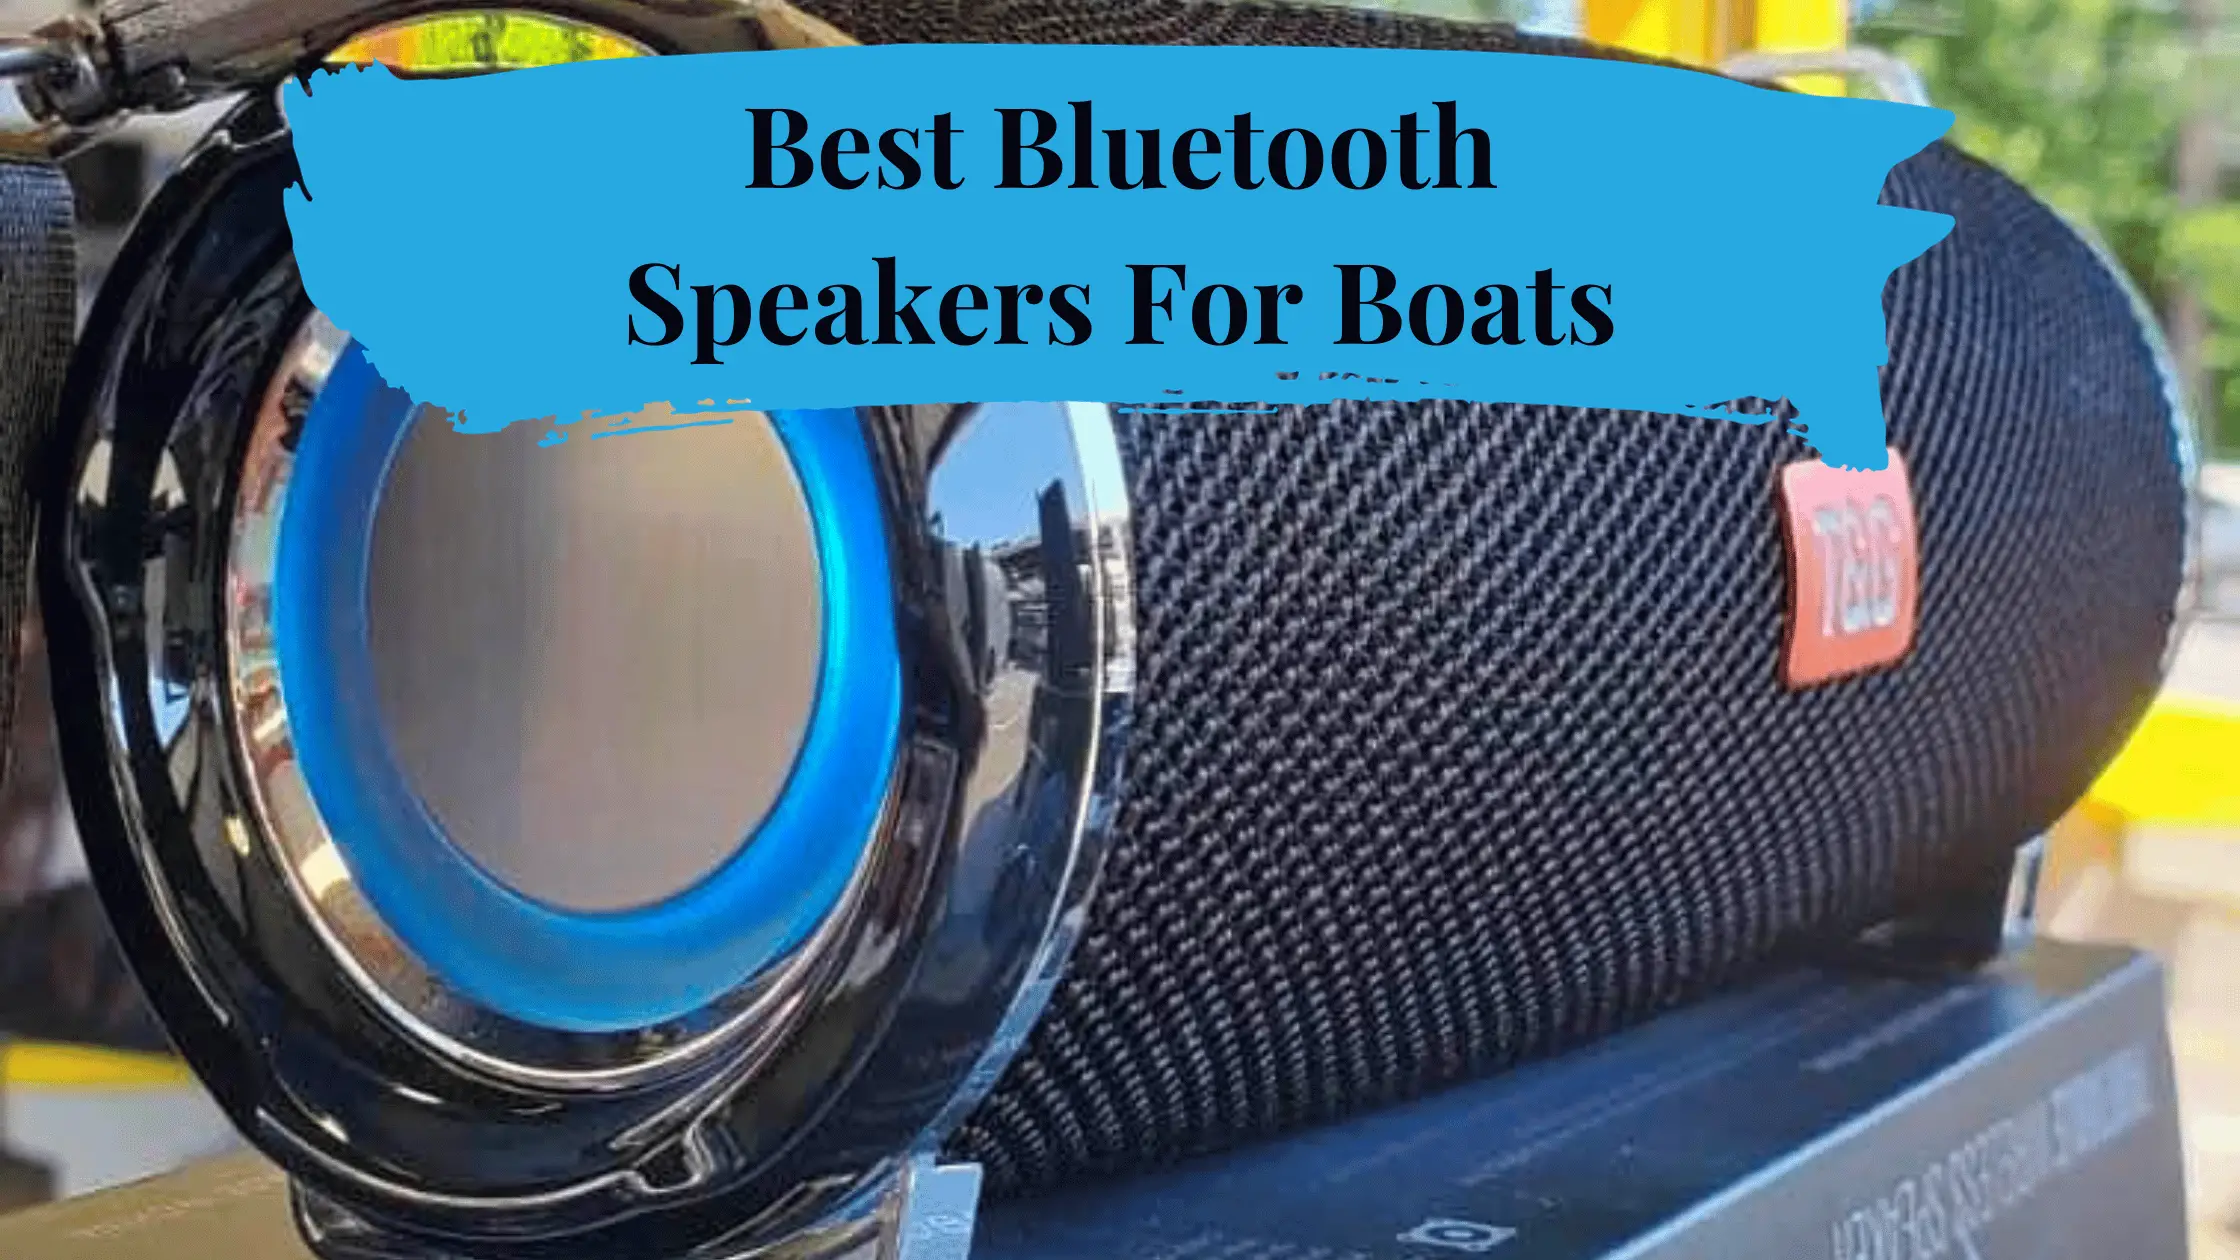 Best Bluetooth Speakers For Boats